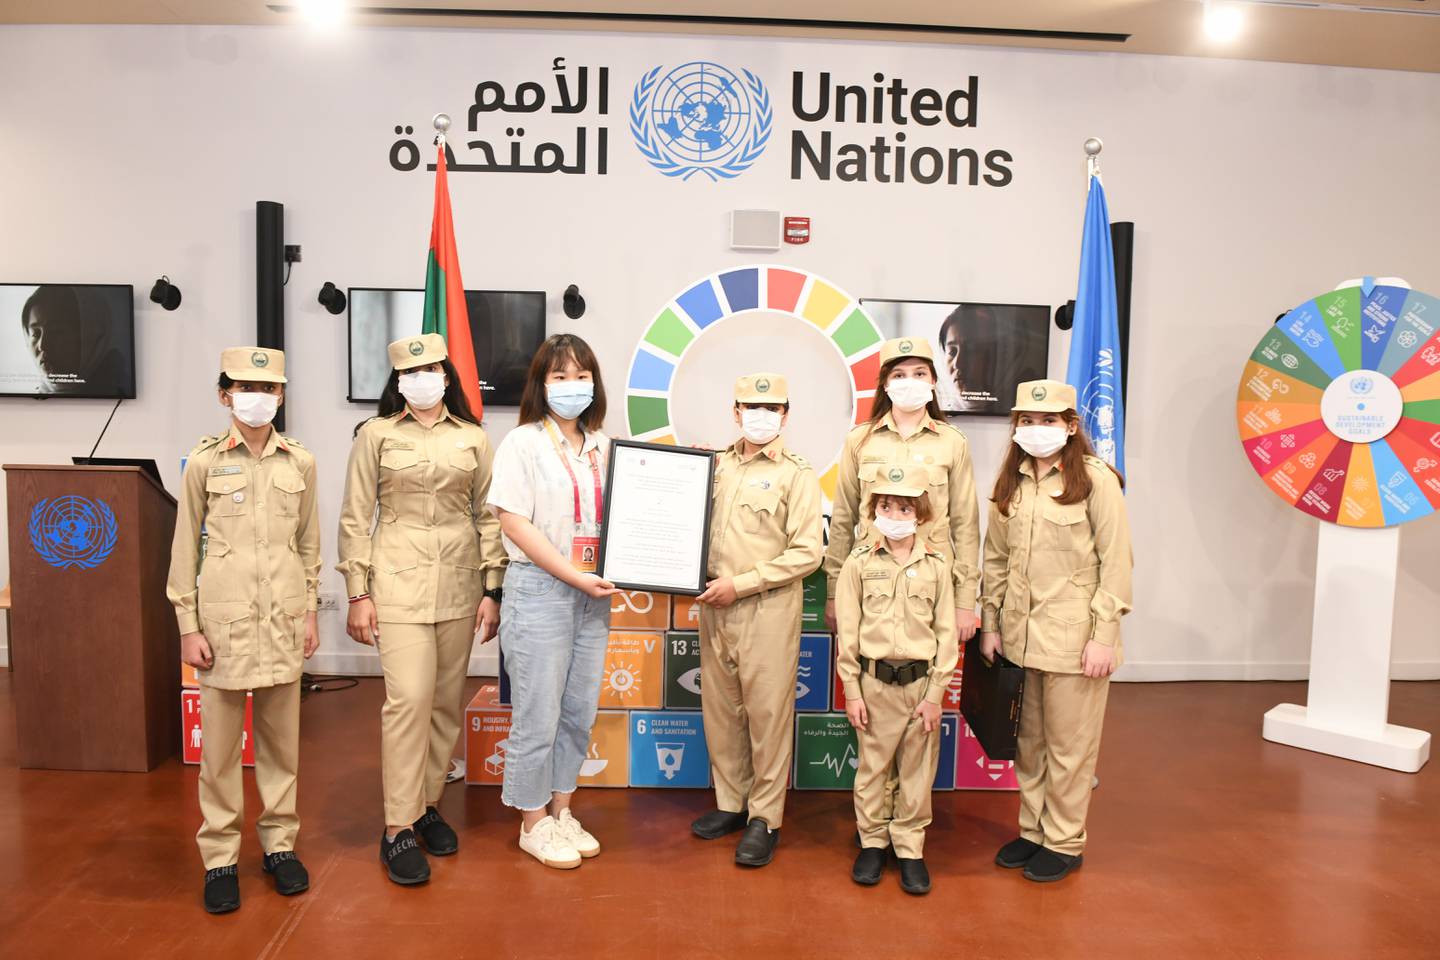 Children take part in Dubai Police's Safety Ambassadors programme that aims to teach children about abuse and how to report it. Photo: Dubai Police.